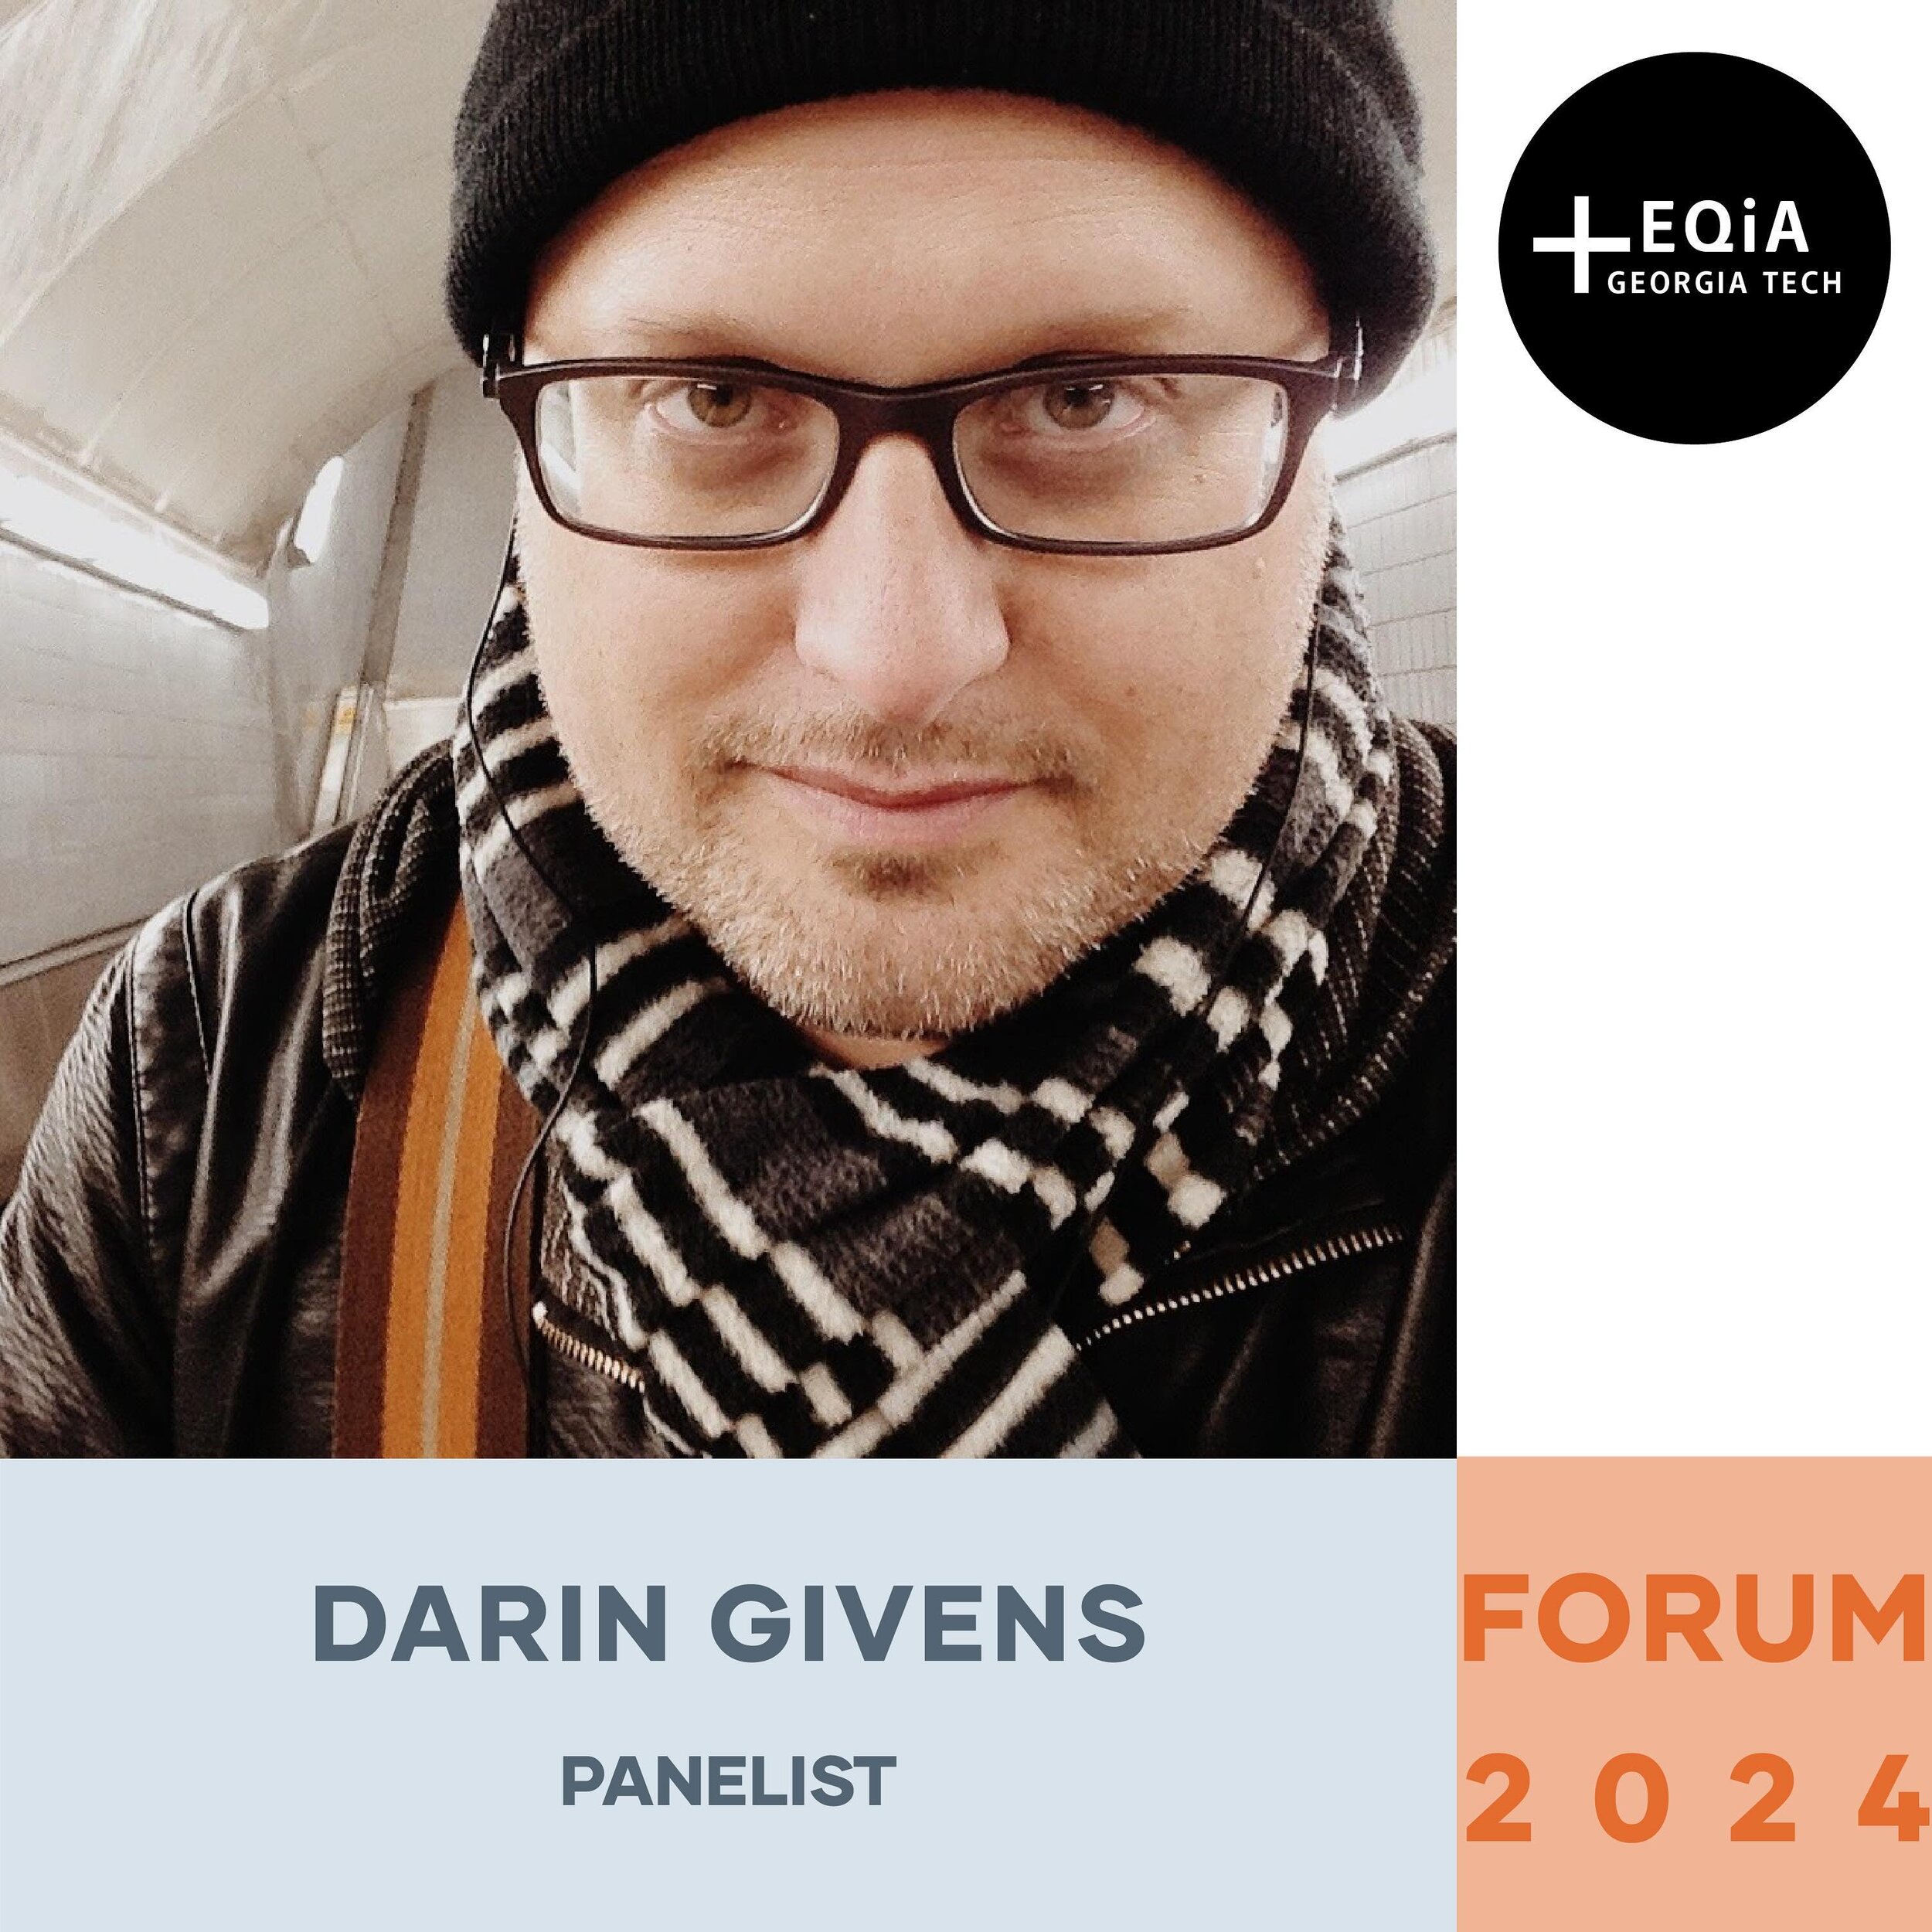 ⭐️ FORUM PANELIST ⭐️ 

Darin Givens, a metro Atlanta native, is the co-founder of a nonprofit organization urbanism advocacy in Atlanta called ThreadATL. He is a former journalist/freelance writer. Darin Givens was named as Best Blogger in Atlanta by